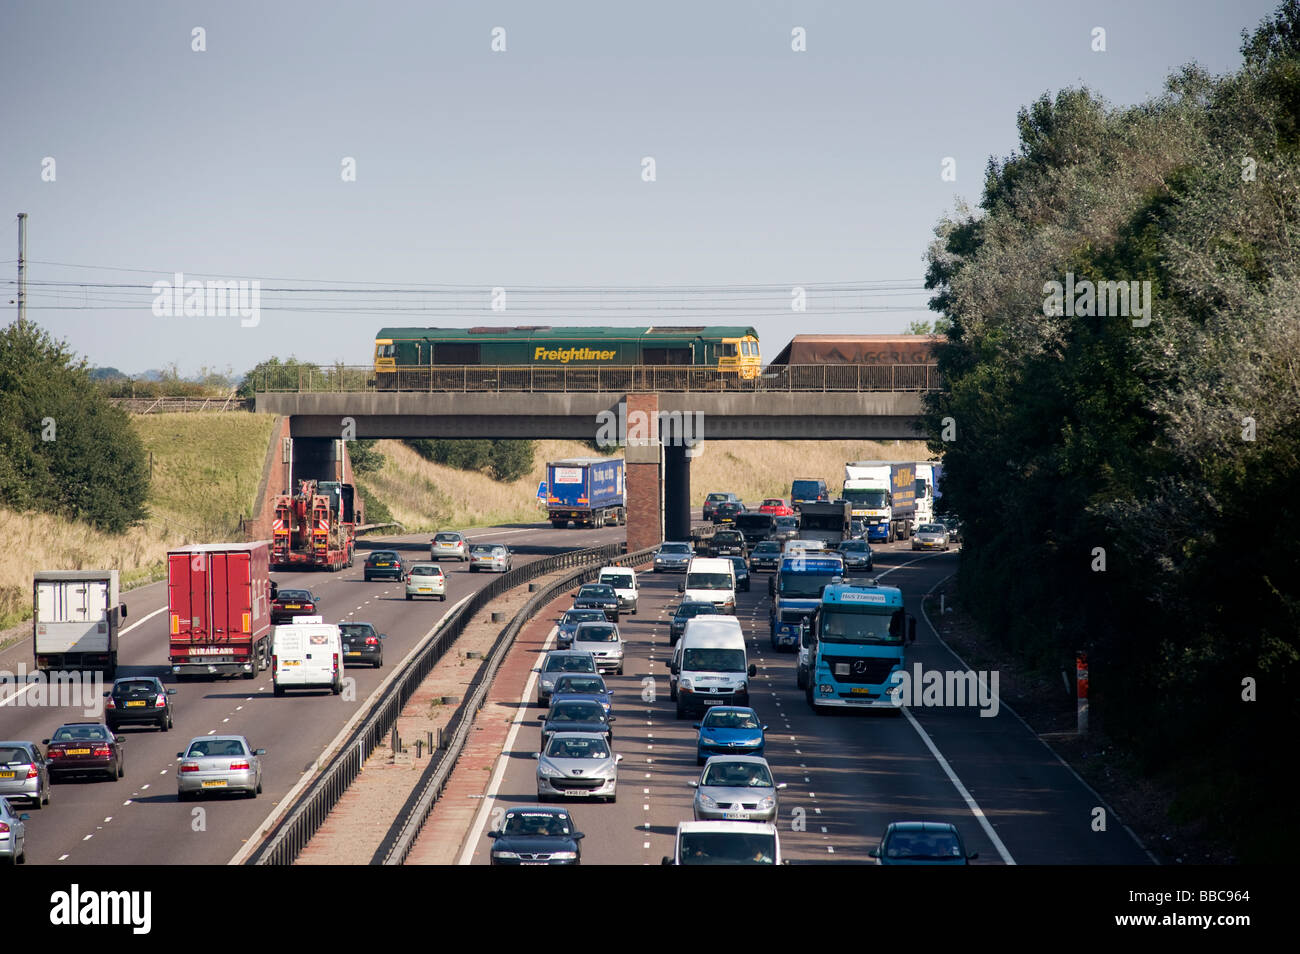 Freightliner locomotive hauling aggregate wagons across a bridge spanning a busy motorway in England Stock Photo